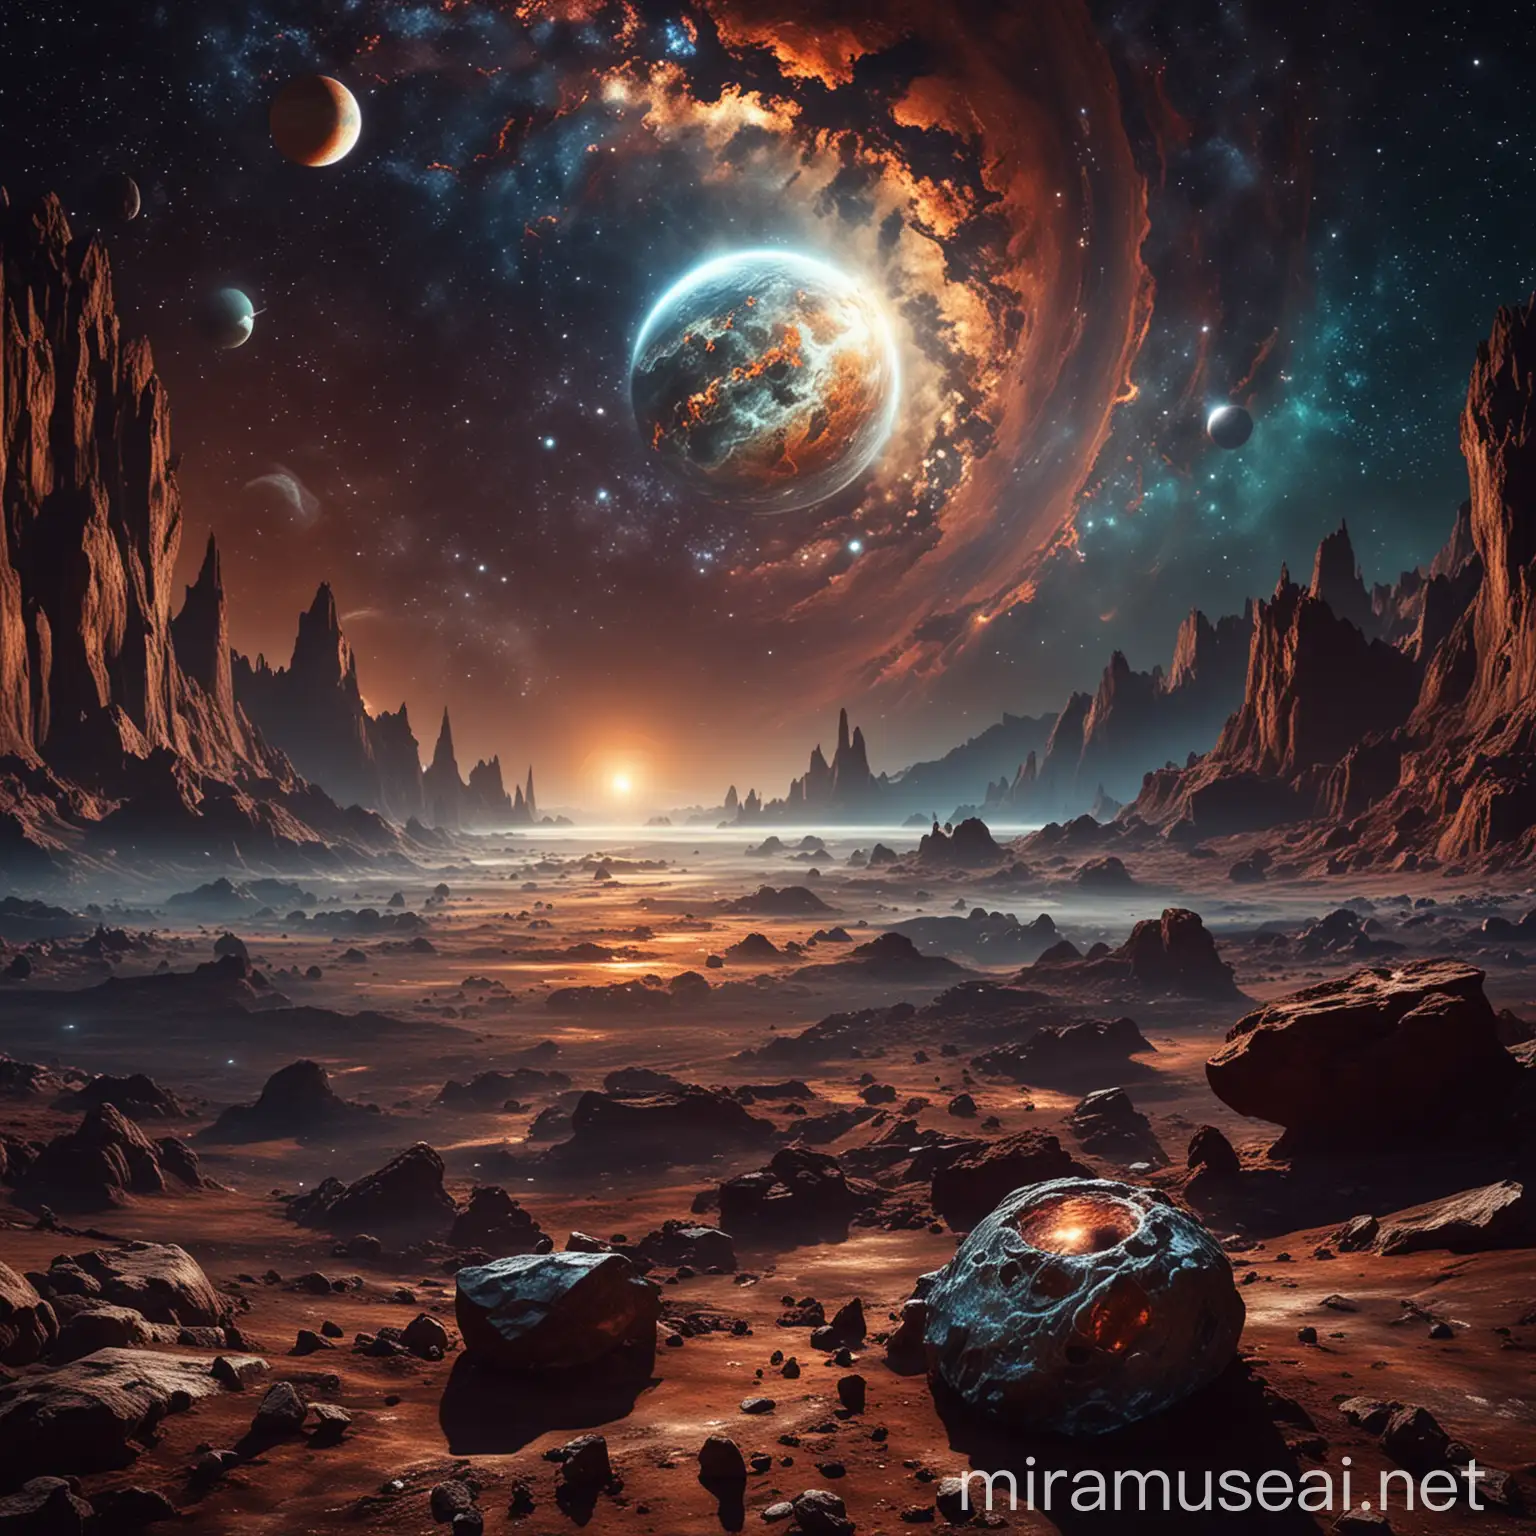 another world, another planet, a different landscape with rocks, a star nebula in the sky, a large gas planet, (planet with rings), a companion moon. In the atmosphere round, sphere, space bark, with illumination.